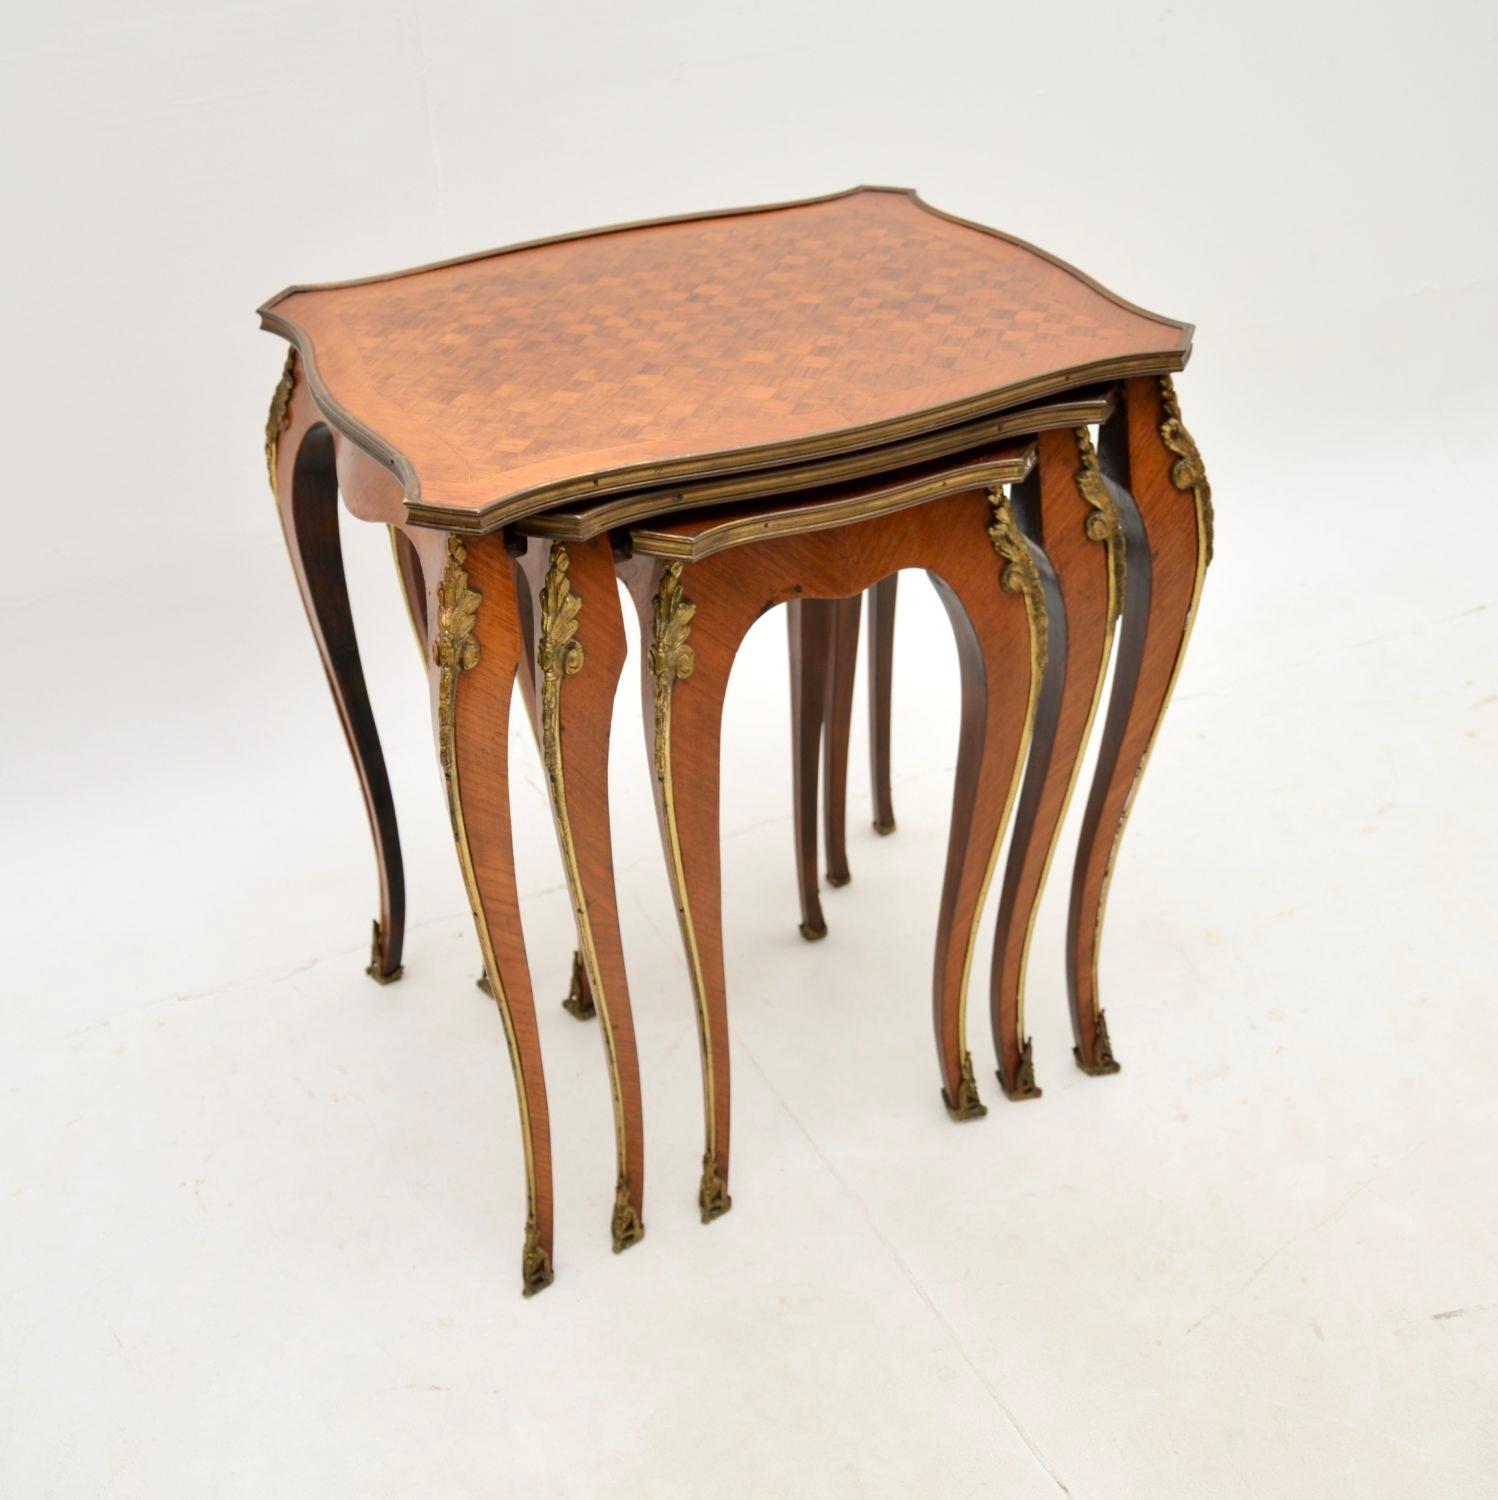 A beautiful and elegant antique French nest of tables, dating from around the 1920-30’s period.

The quality is fabulous, these are very well made with a beautiful inlaid design and gilt bronze mounts.

We have had these recently French polished,